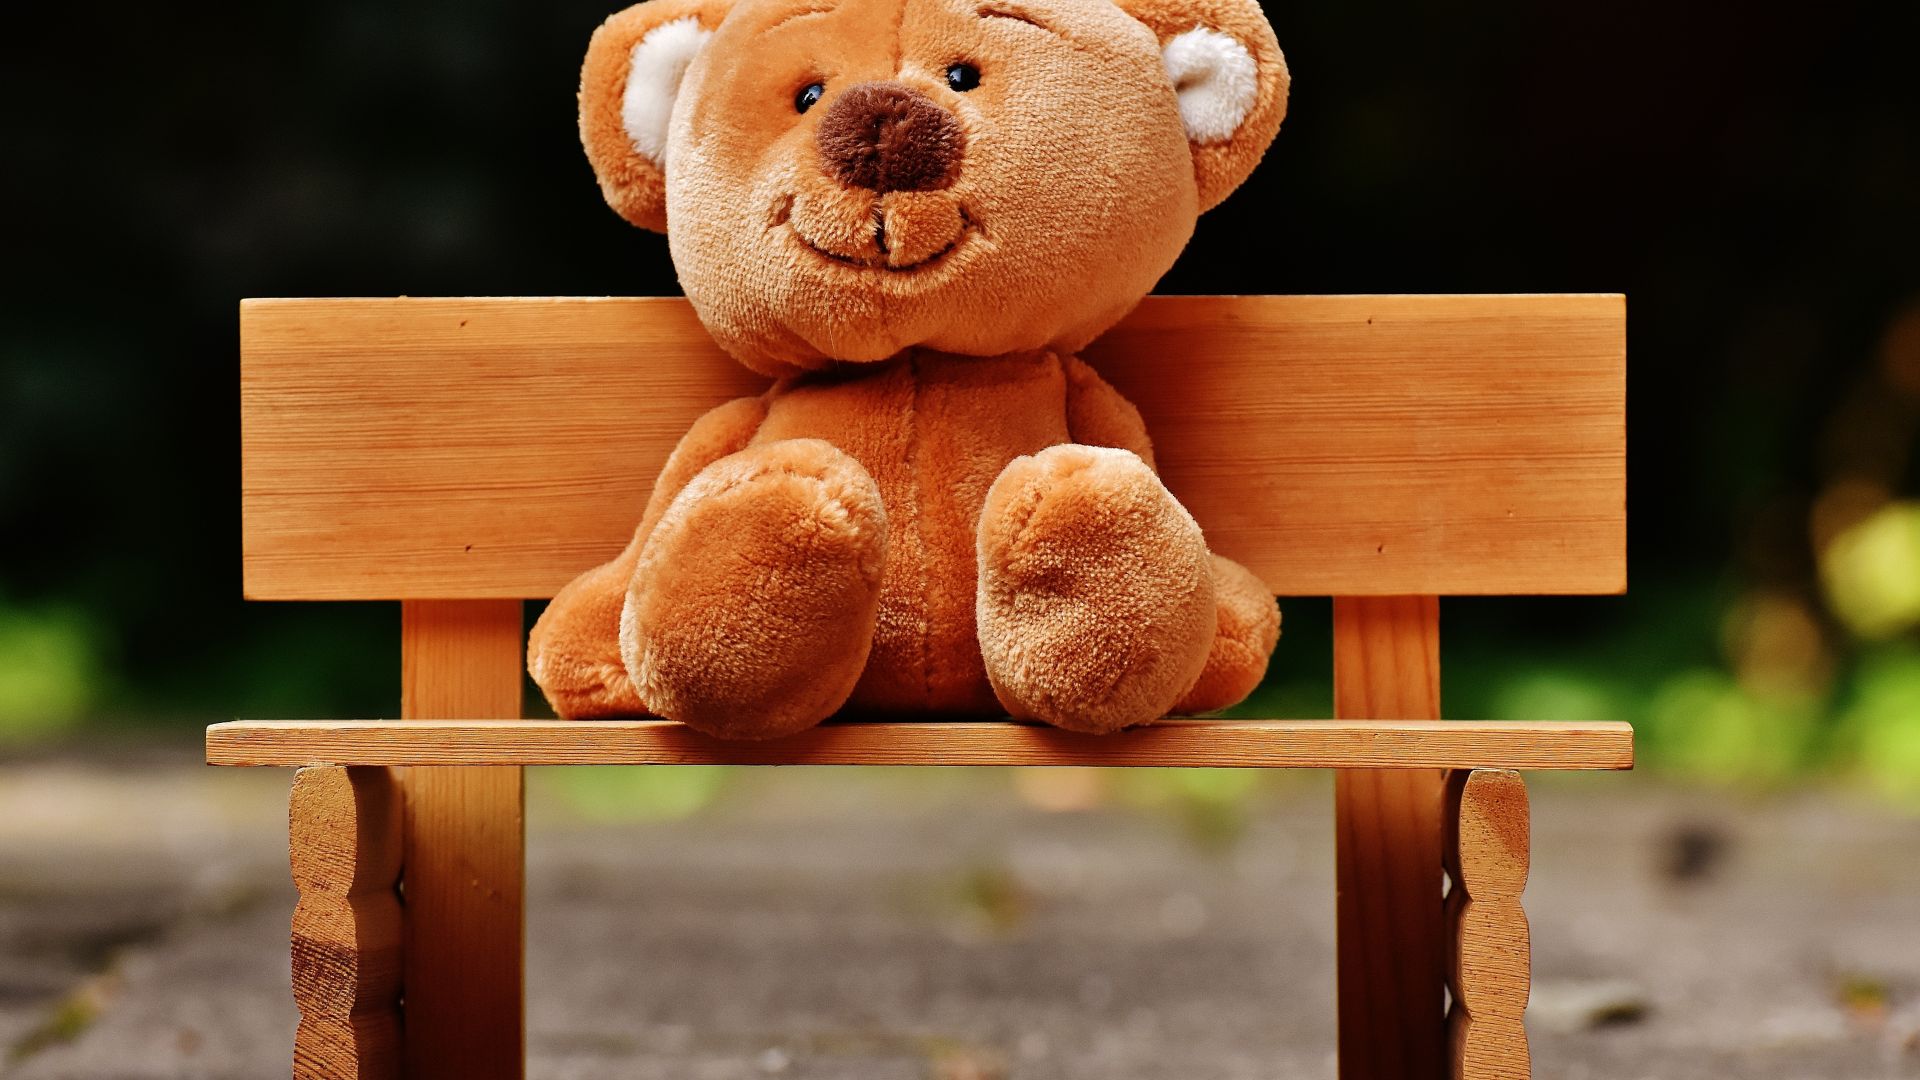 Desktop Wallpaper Teddy Bear, Sitting, Bench, Toy, Hd Image, Picture,  Background, Aua8g3